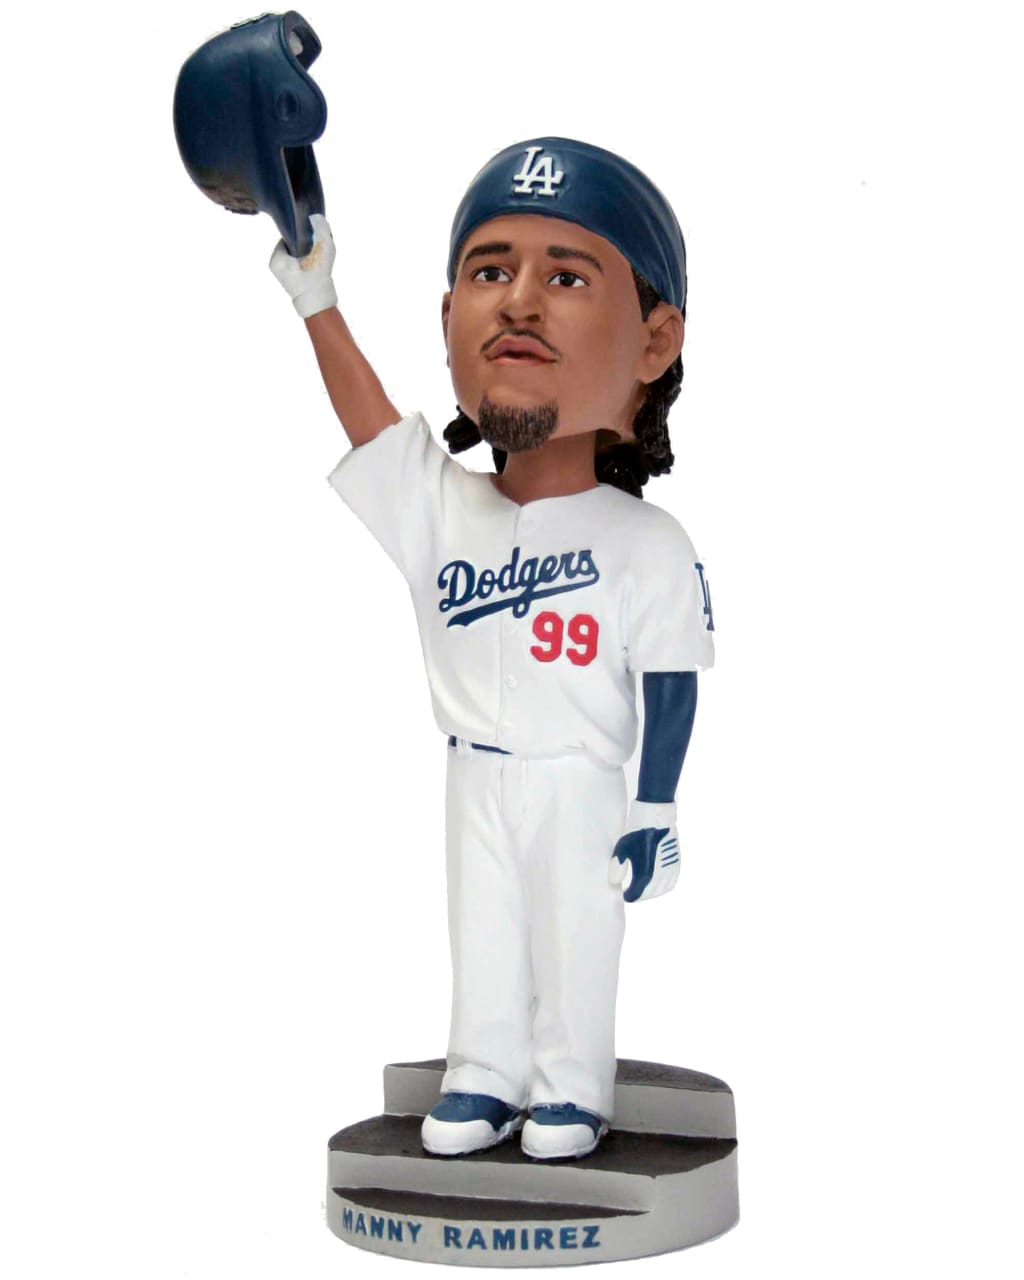 The Rays found these long-lost Manny Ramirez bobbleheads, and one